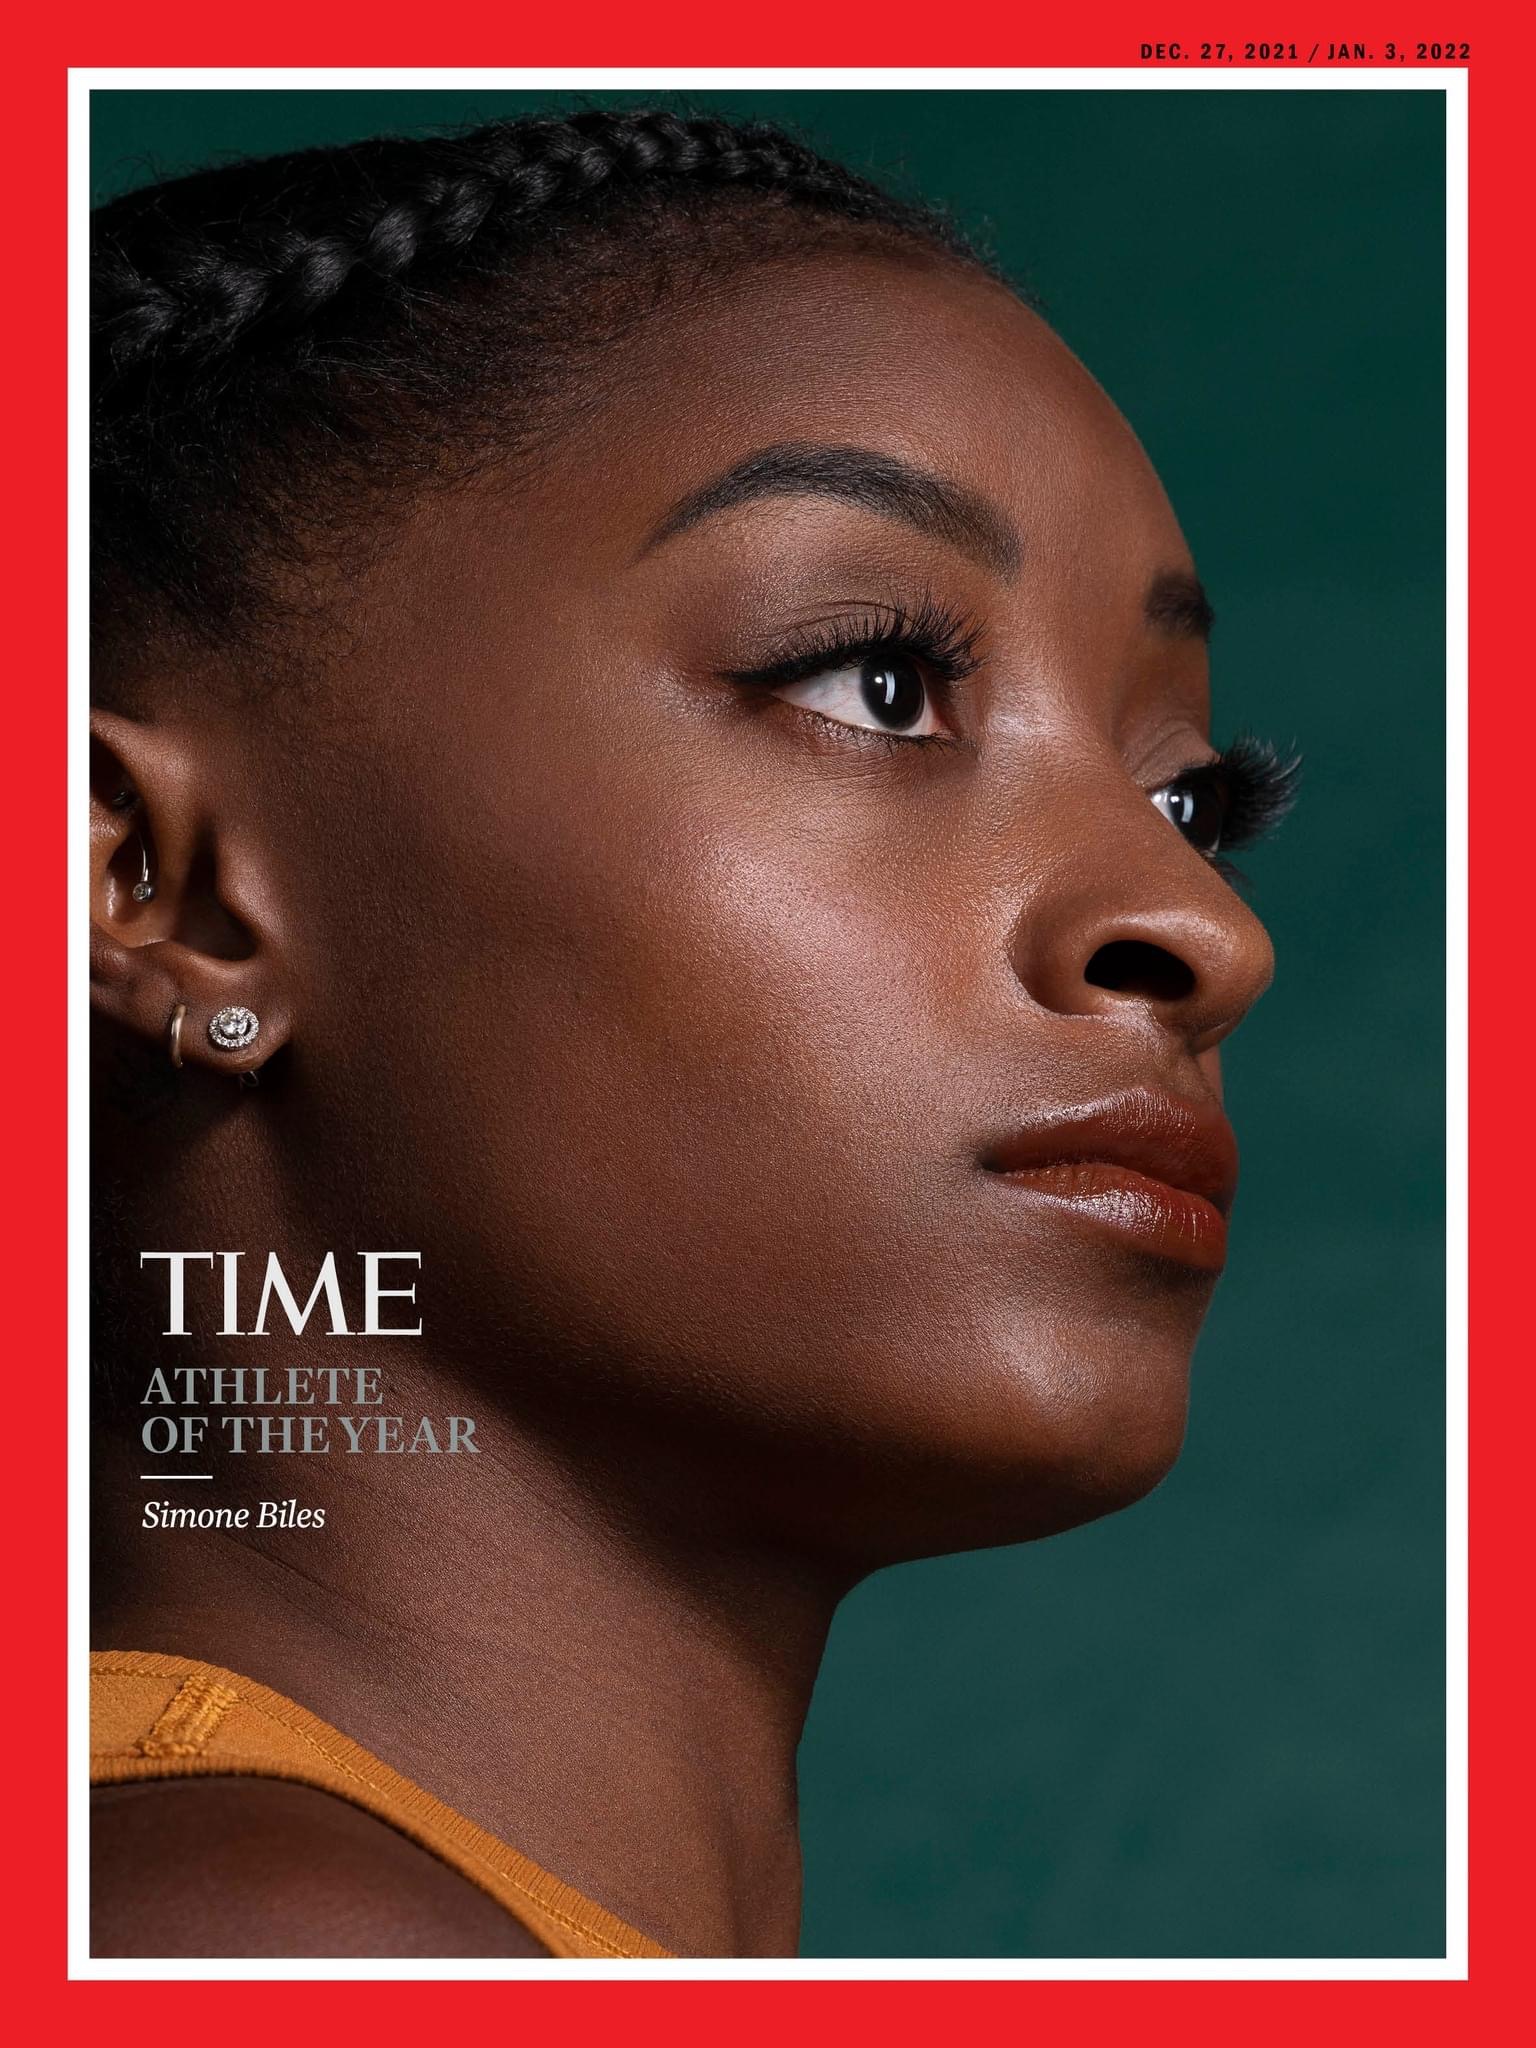 Simone Biles named ‘Athlete of the Year’ by Time Magazine